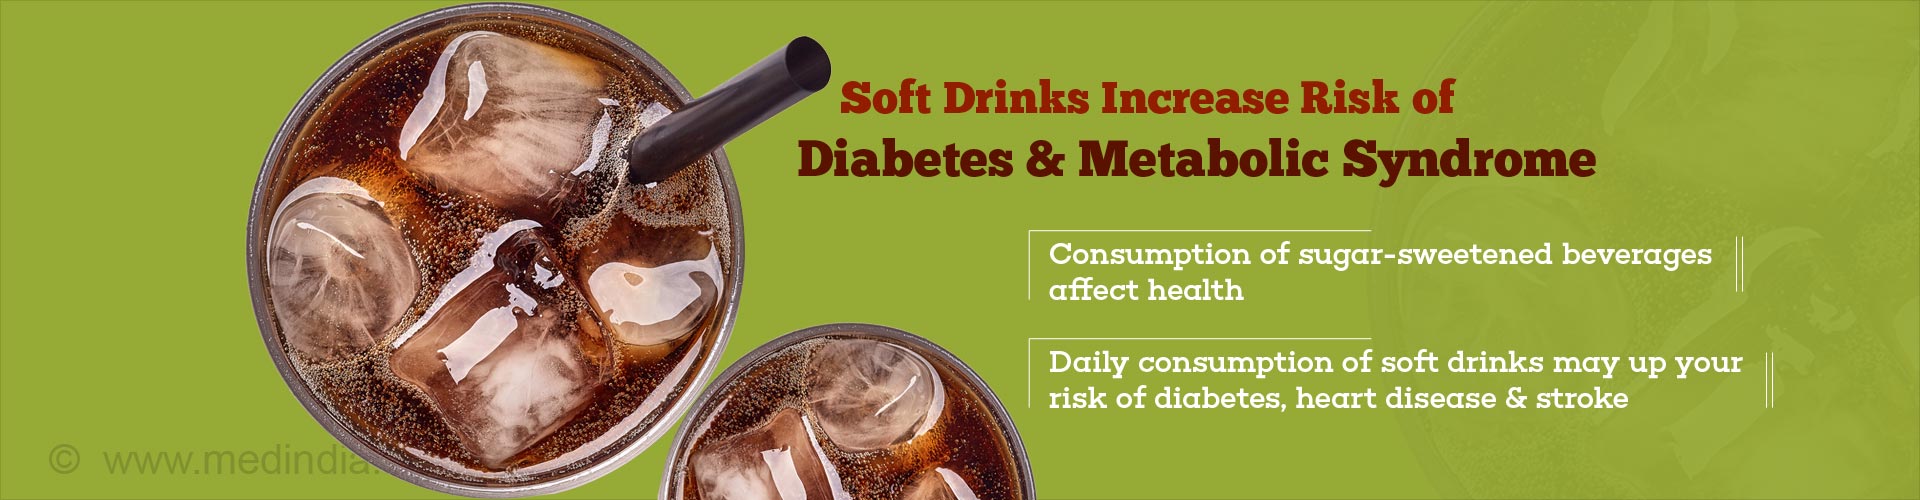 Soft drinks increase risk of diabetes & metabolic syndrome
- consumption of sugar-sweetened beverages affect health
- Daily consumption of sift drinks may up your risk of diabetes, heart disease & stroke